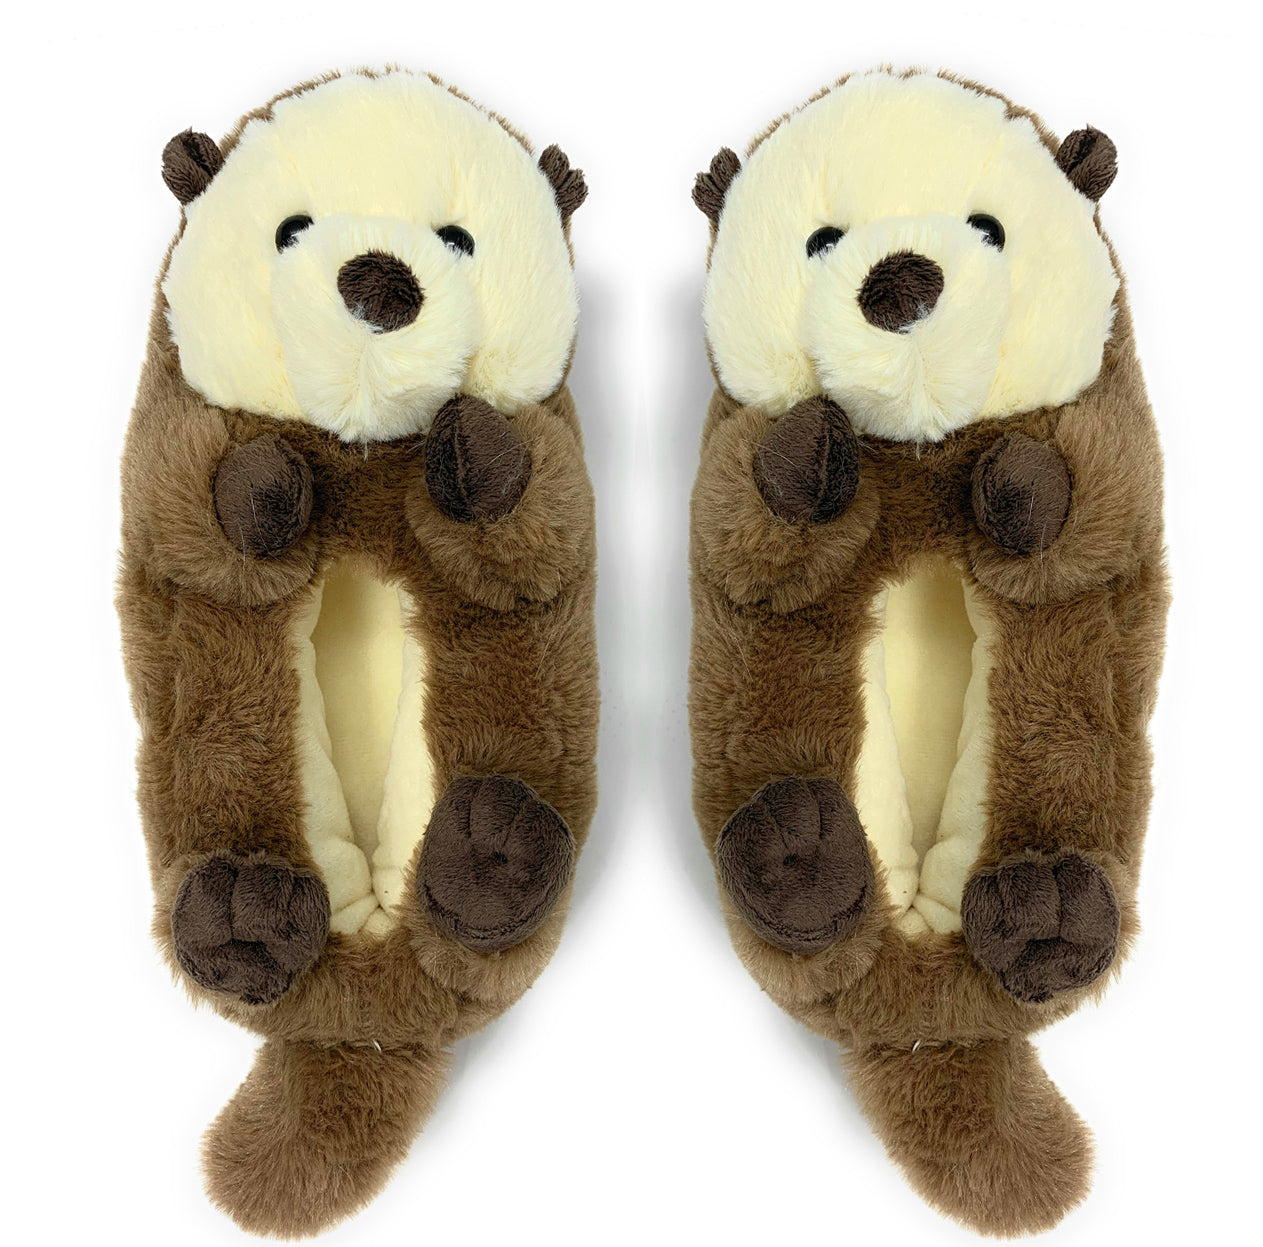 Otter One Fuzzy Slippers